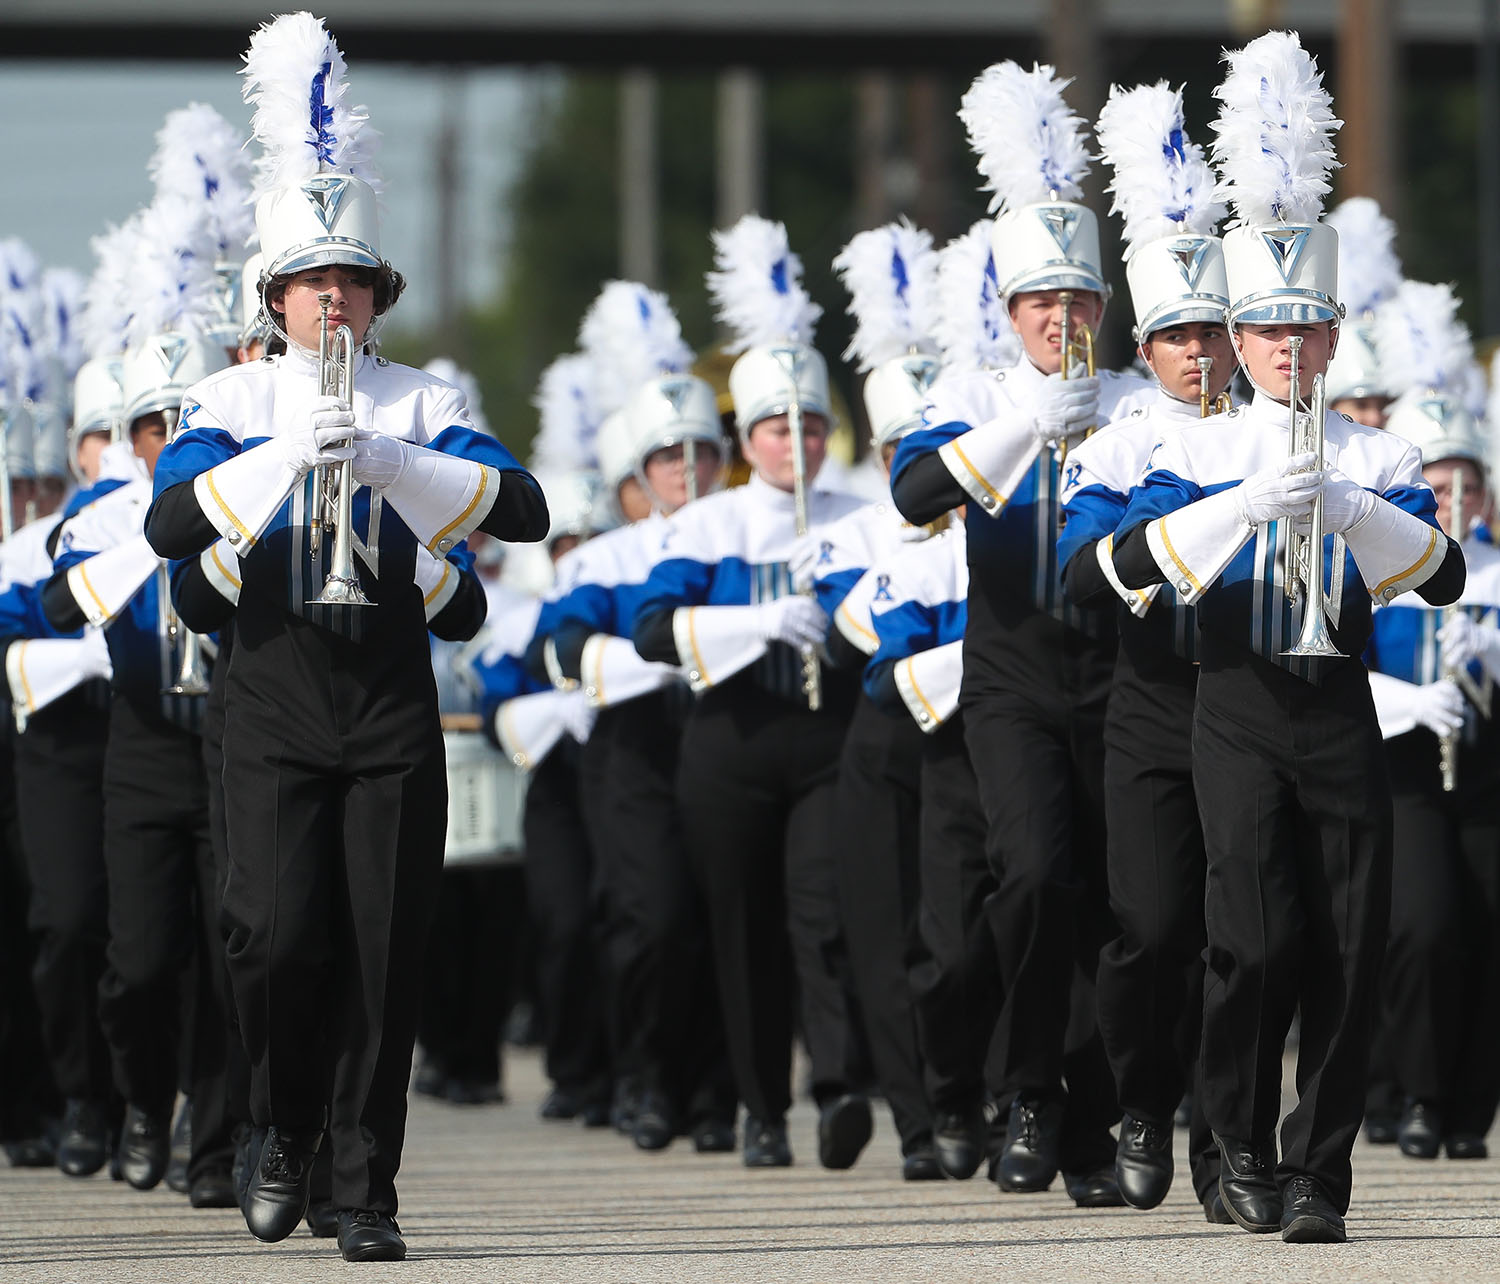 UNK Band Day Parade scheduled for Saturday in downtown Kearney UNK News